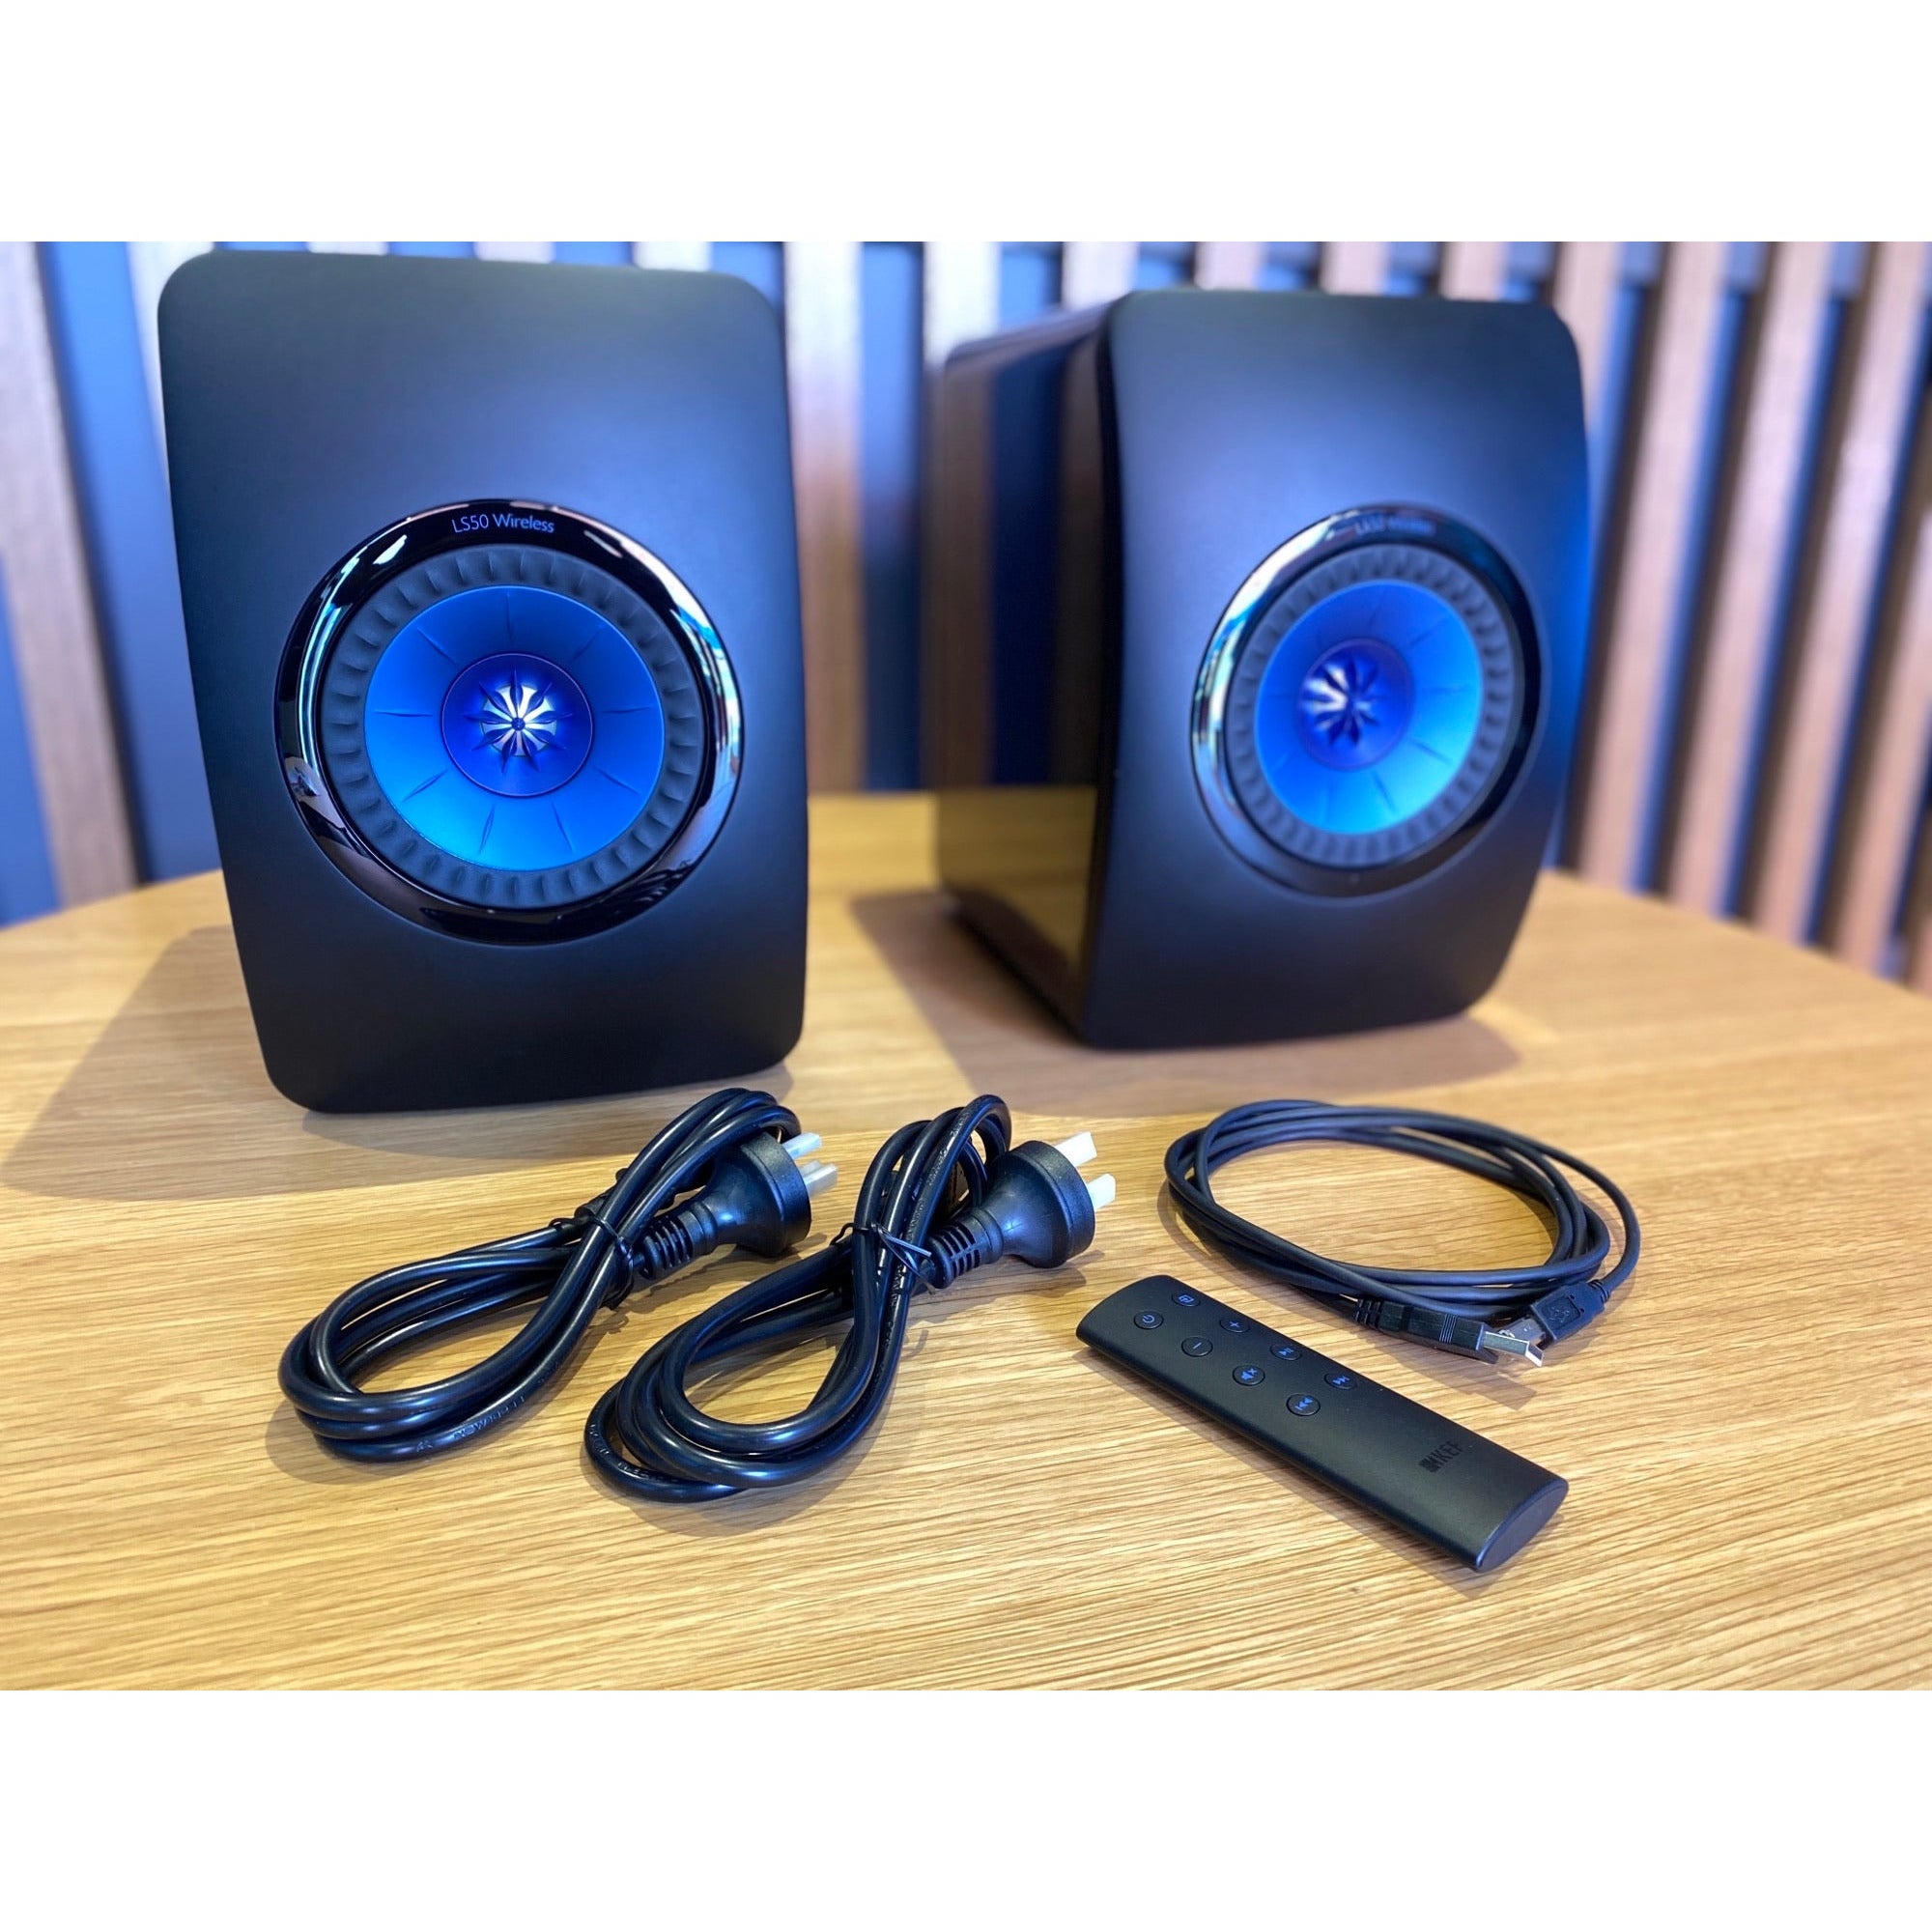 KEF LS50 Wireless Speakers (MK1) - Consignment